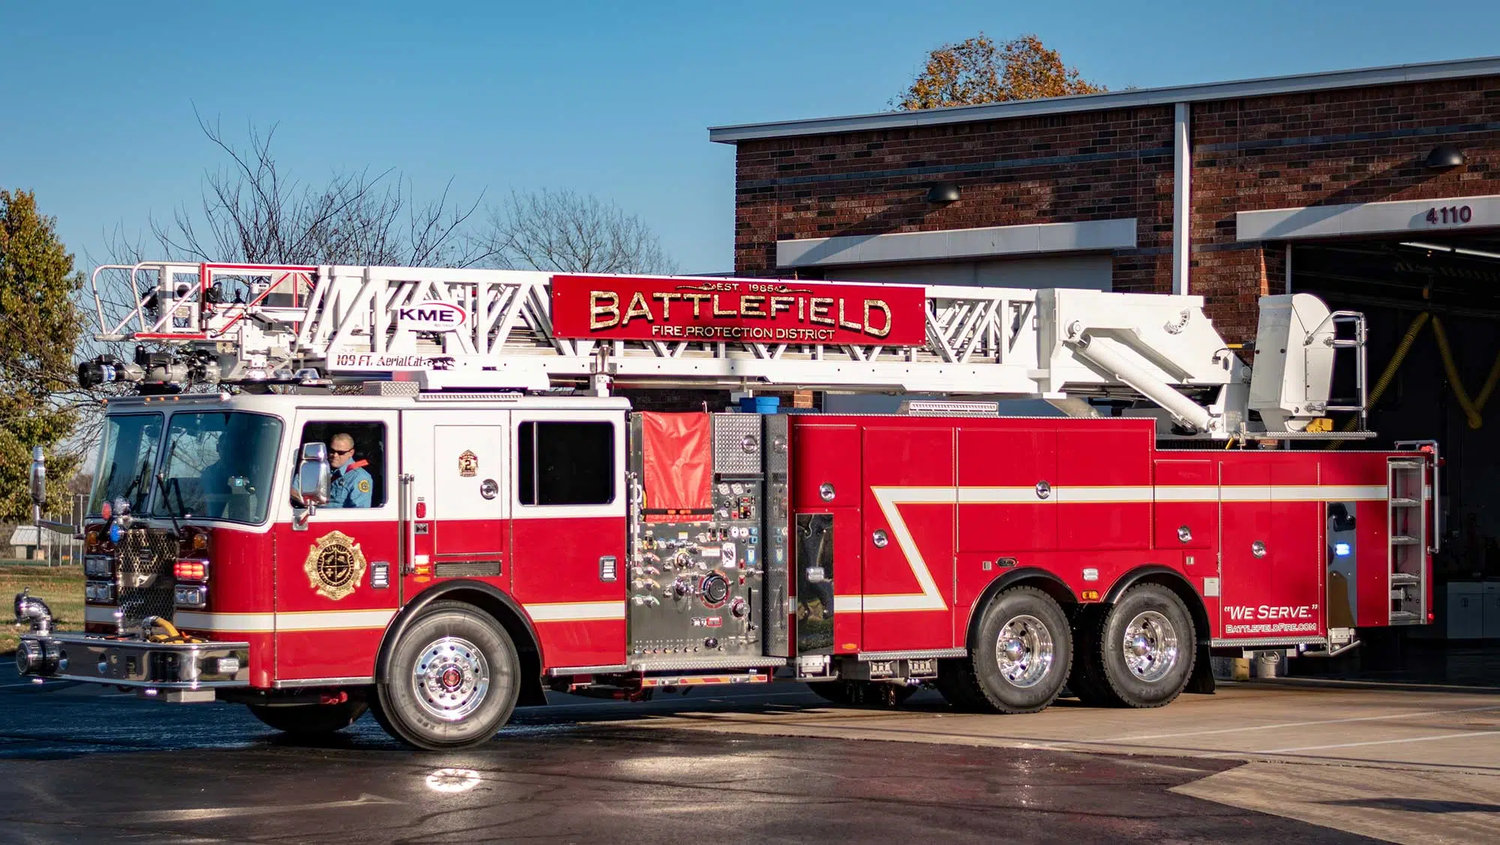 Battlefield Fire Protection District officials say they're experiencing an increase in demand for services.